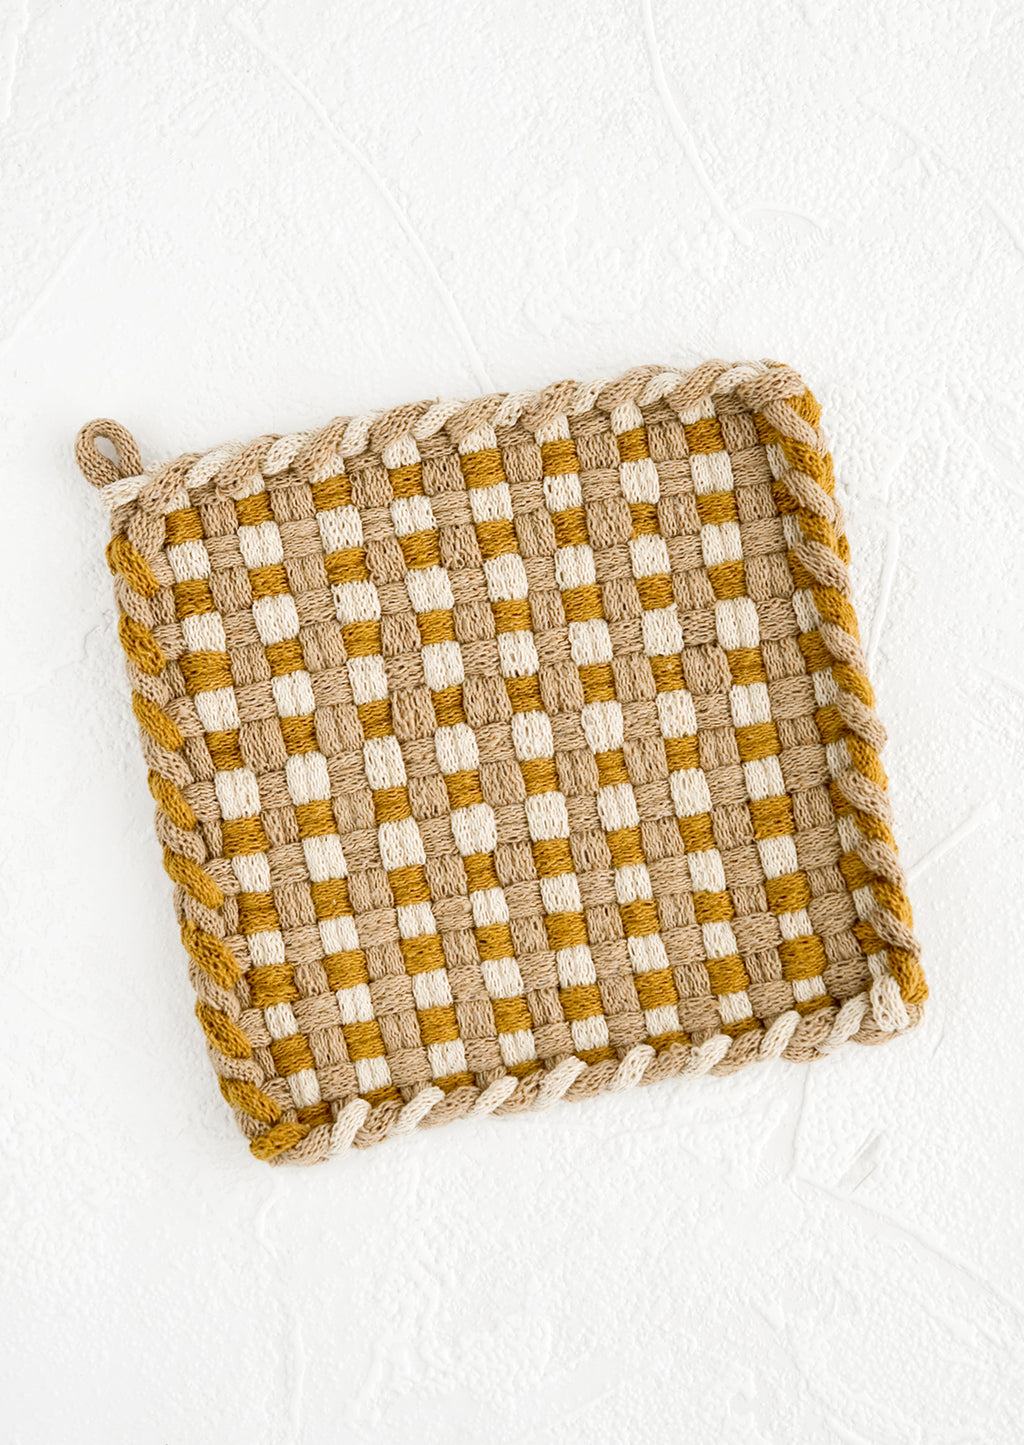 Ochre / Ivory / Taupe: A hand-knit potholder in checkered weave of ochre, taupe and natural.